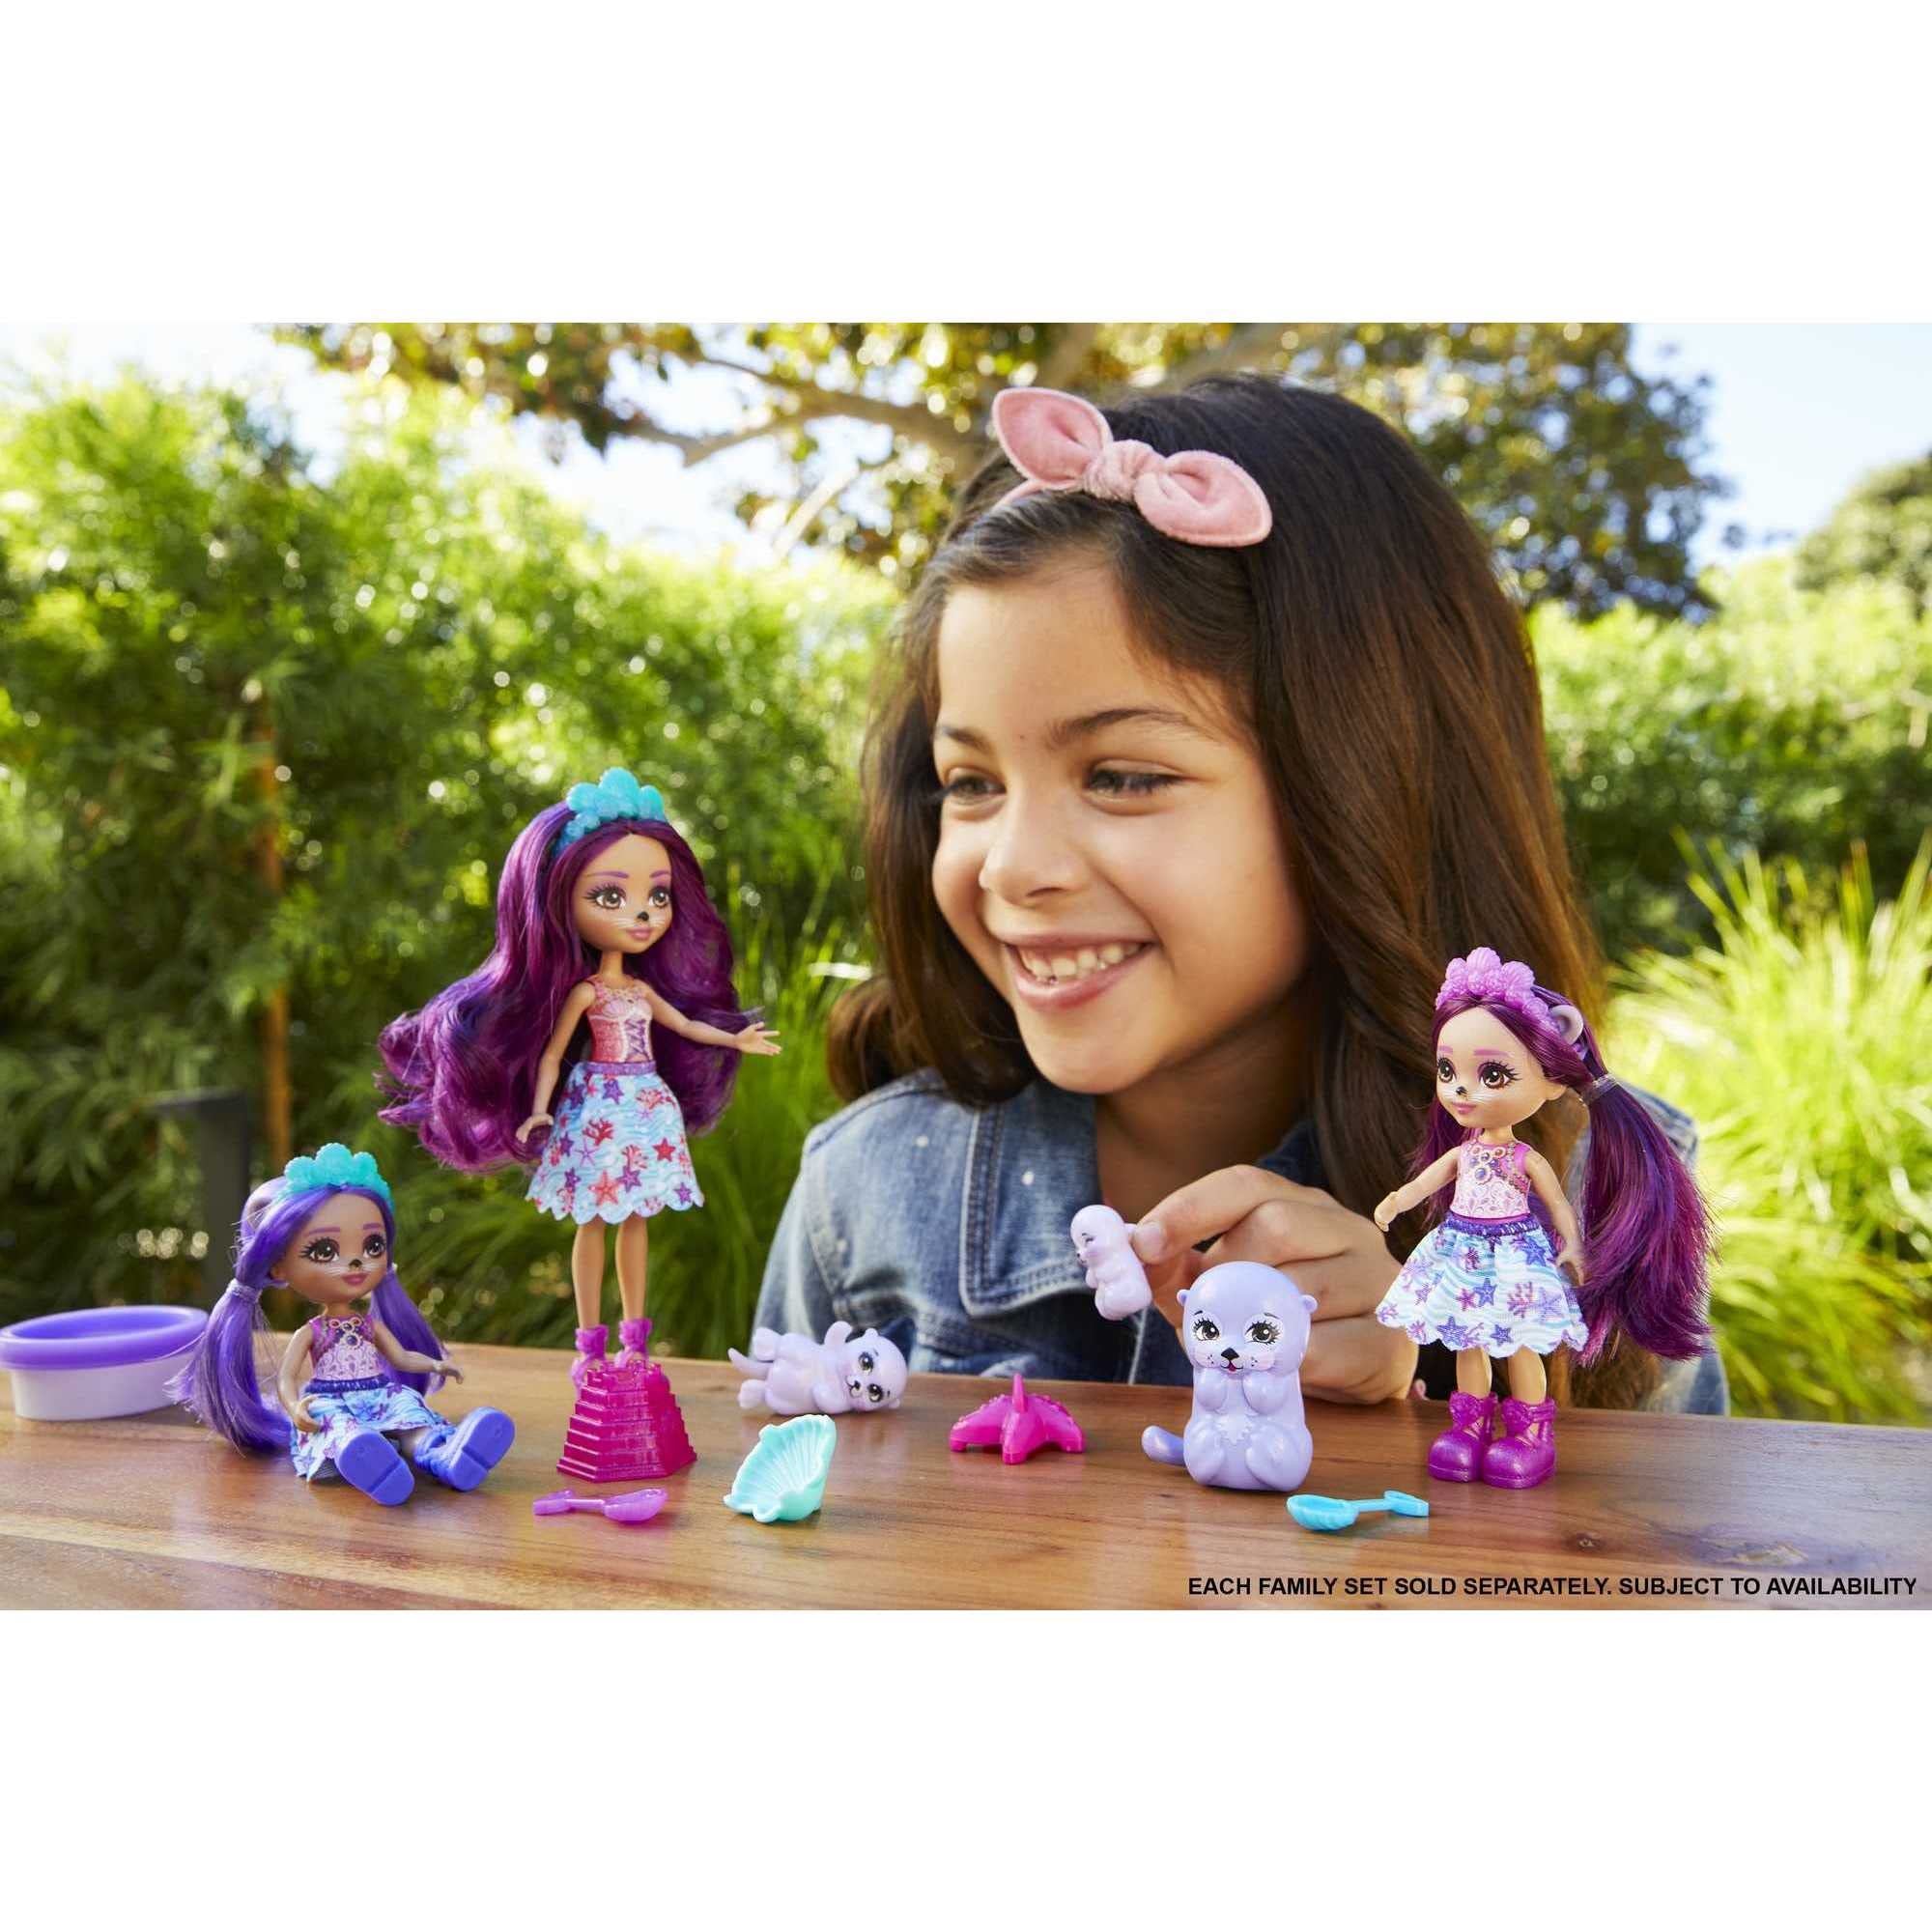 Enchantimals Family Toy Set, Ottavia Otter Doll (6-in) with Little Sibling Dolls (4-in) and 3 Otter Animal Figures, Great Gift for Kids Ages 3 and Up